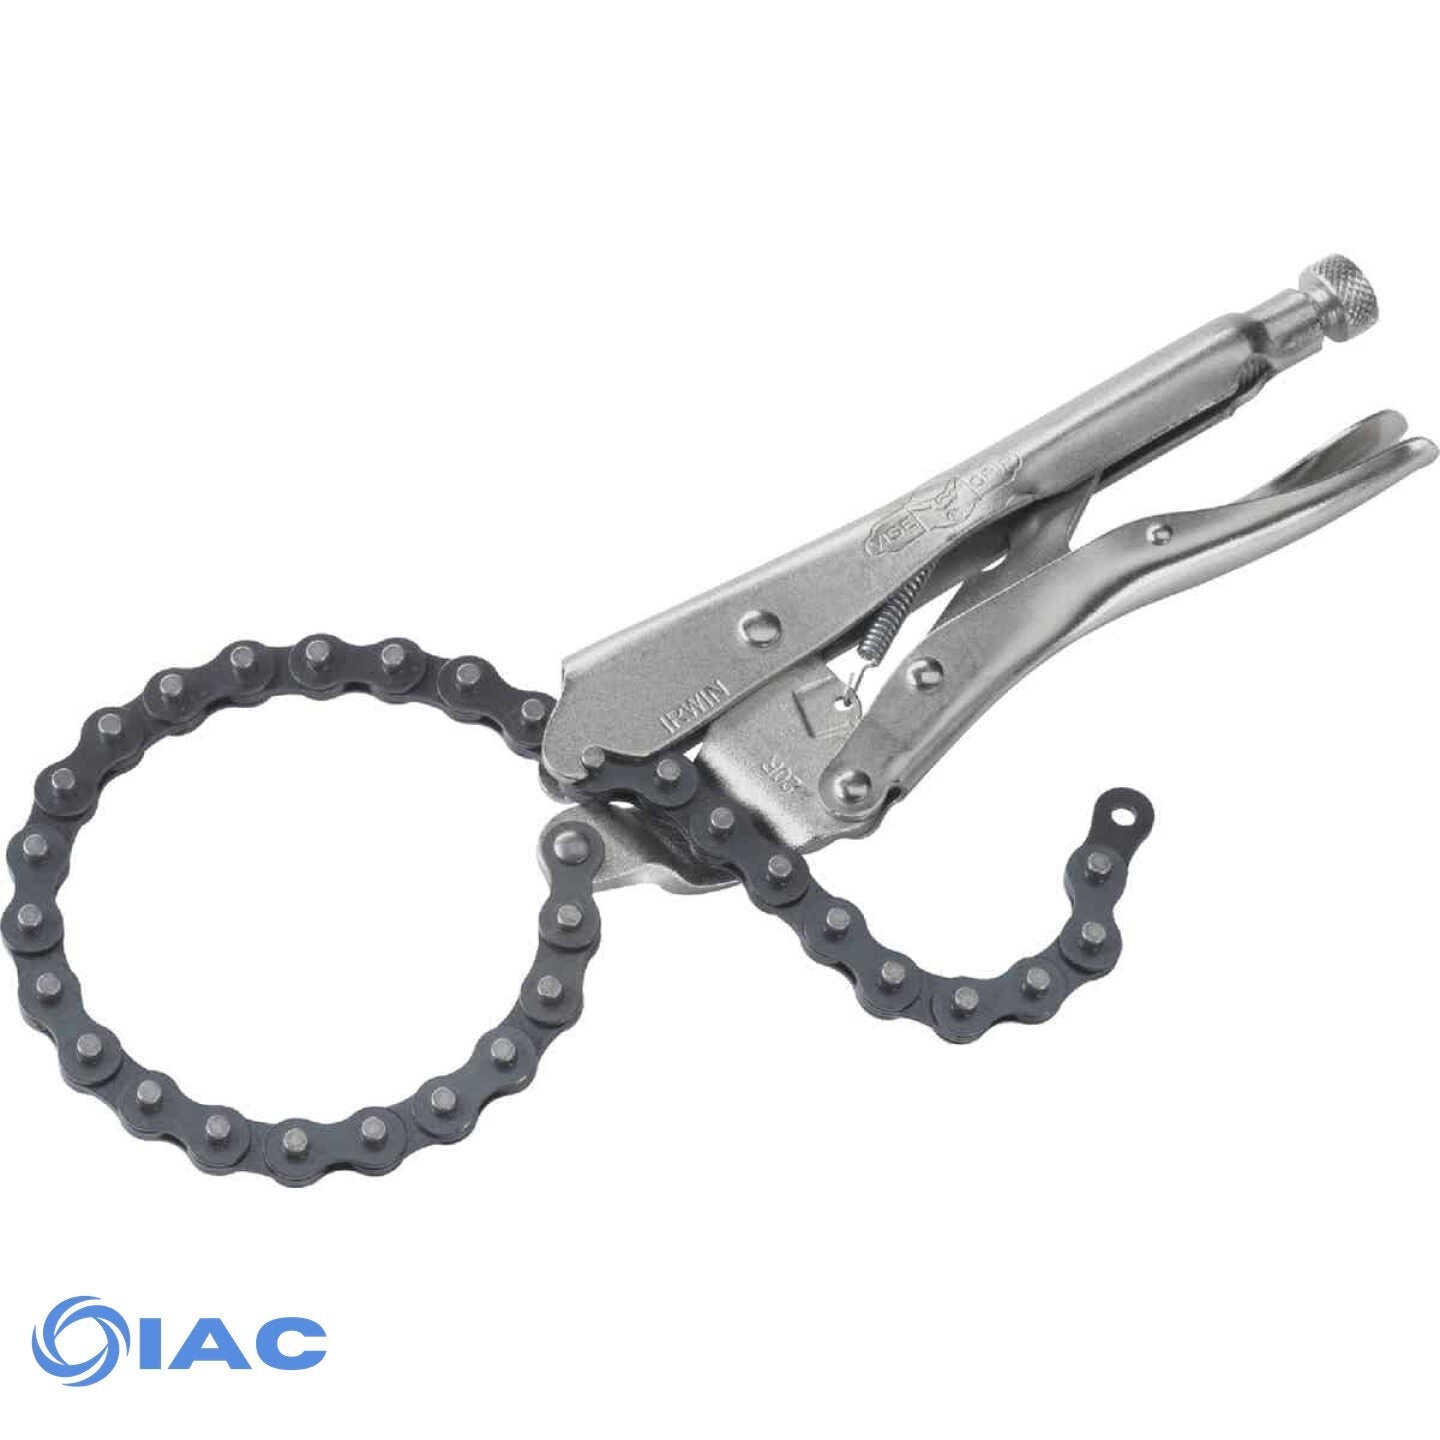 Vise-Grip 20R 9in Chain Clamp CODE: VIS27ZR